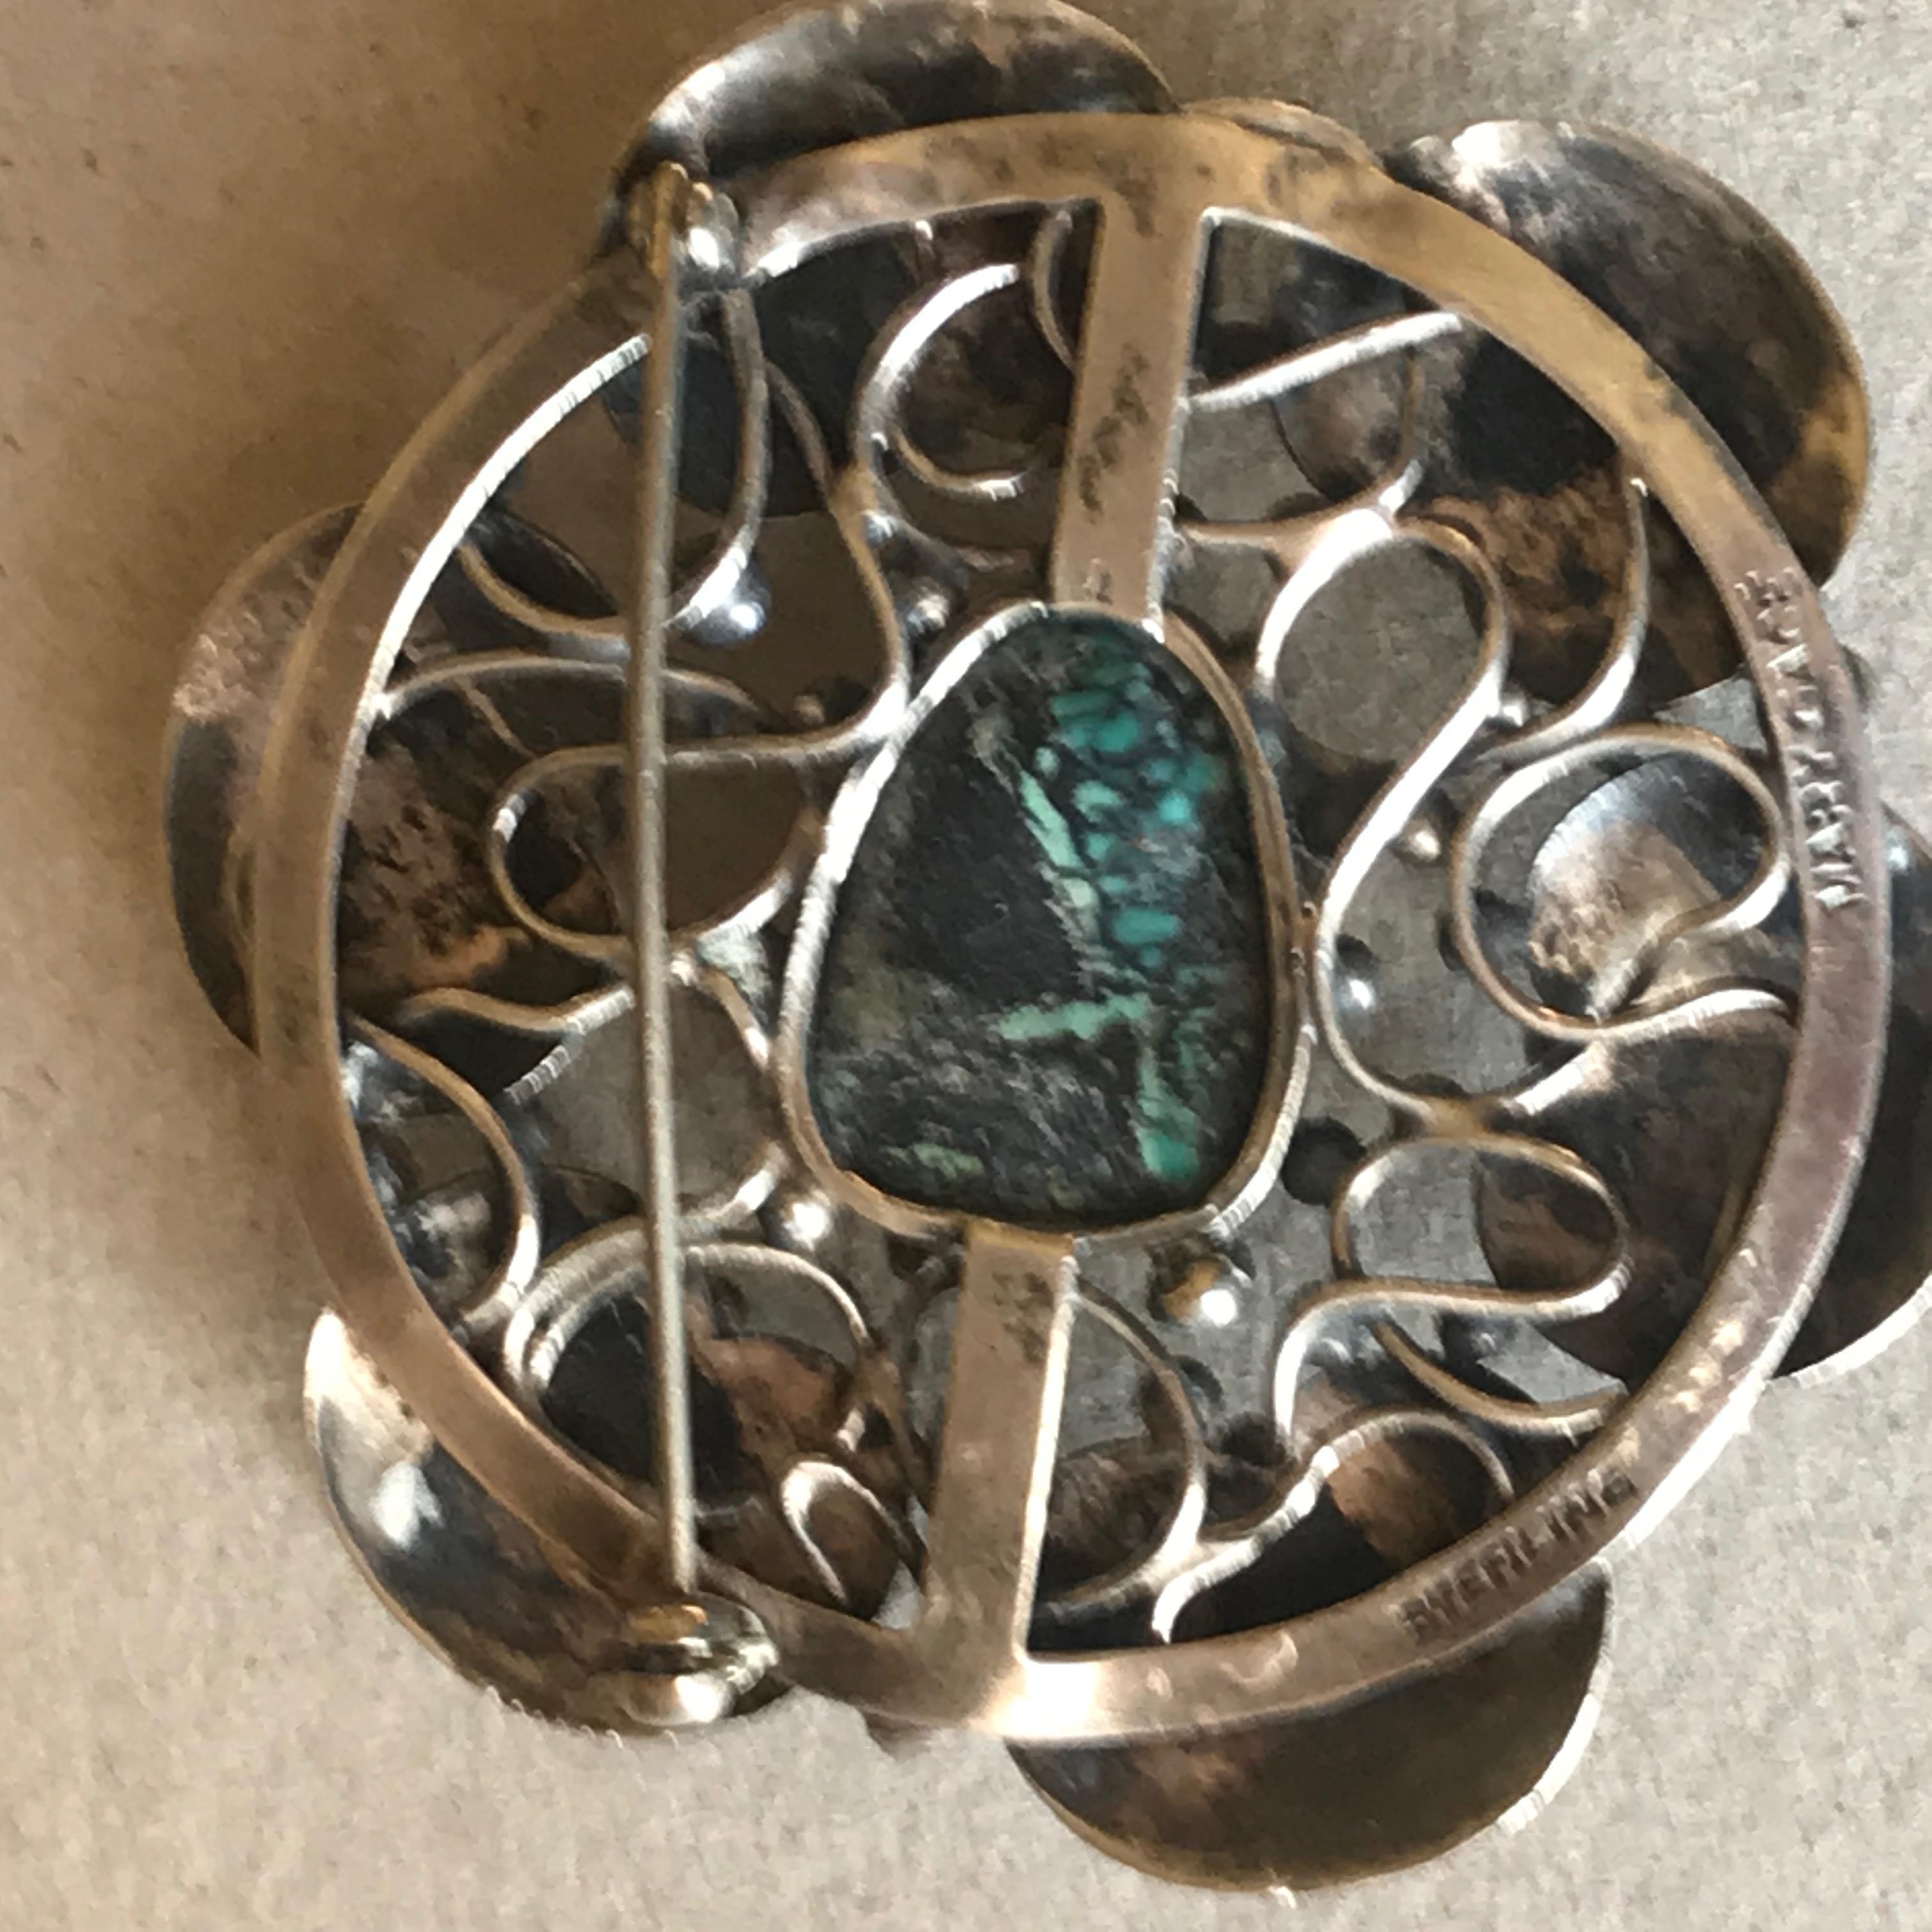 Lily pad sterling silver brooch with turquoise by Mary Gage. 
Complimentary gift box included with purchase.

Mary Gage (1898-1993) was born in Indiana. She served as a nurse during World War I. After the war she traveled around the world, with two